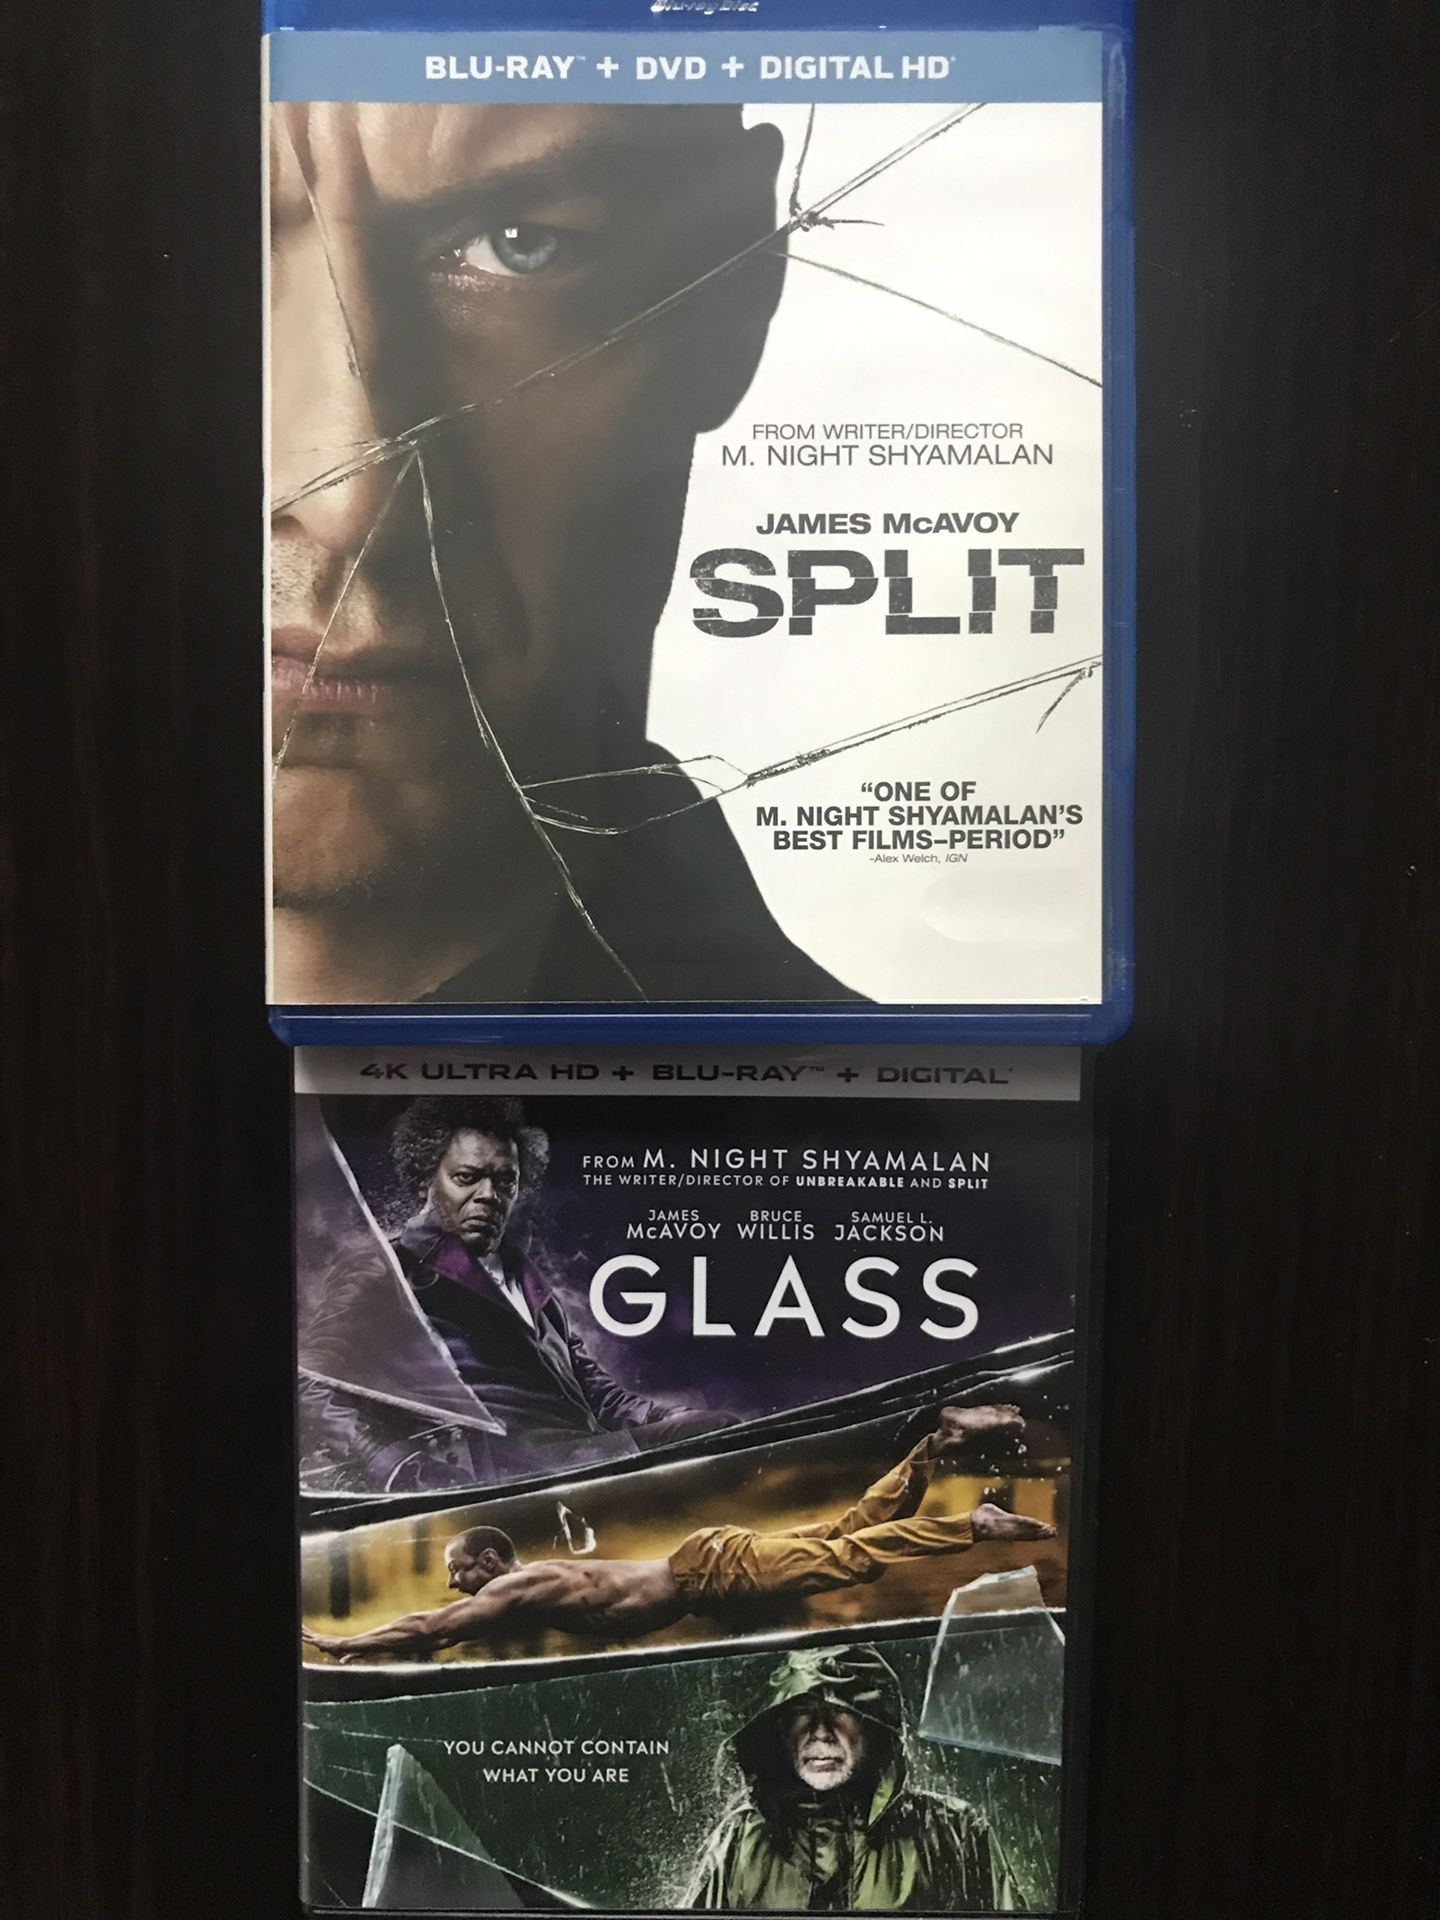 Split and Glass in Blu-ray all for $20, Disney marvel Harry Potter the Star Wars movies Bluray and dvd collectibles